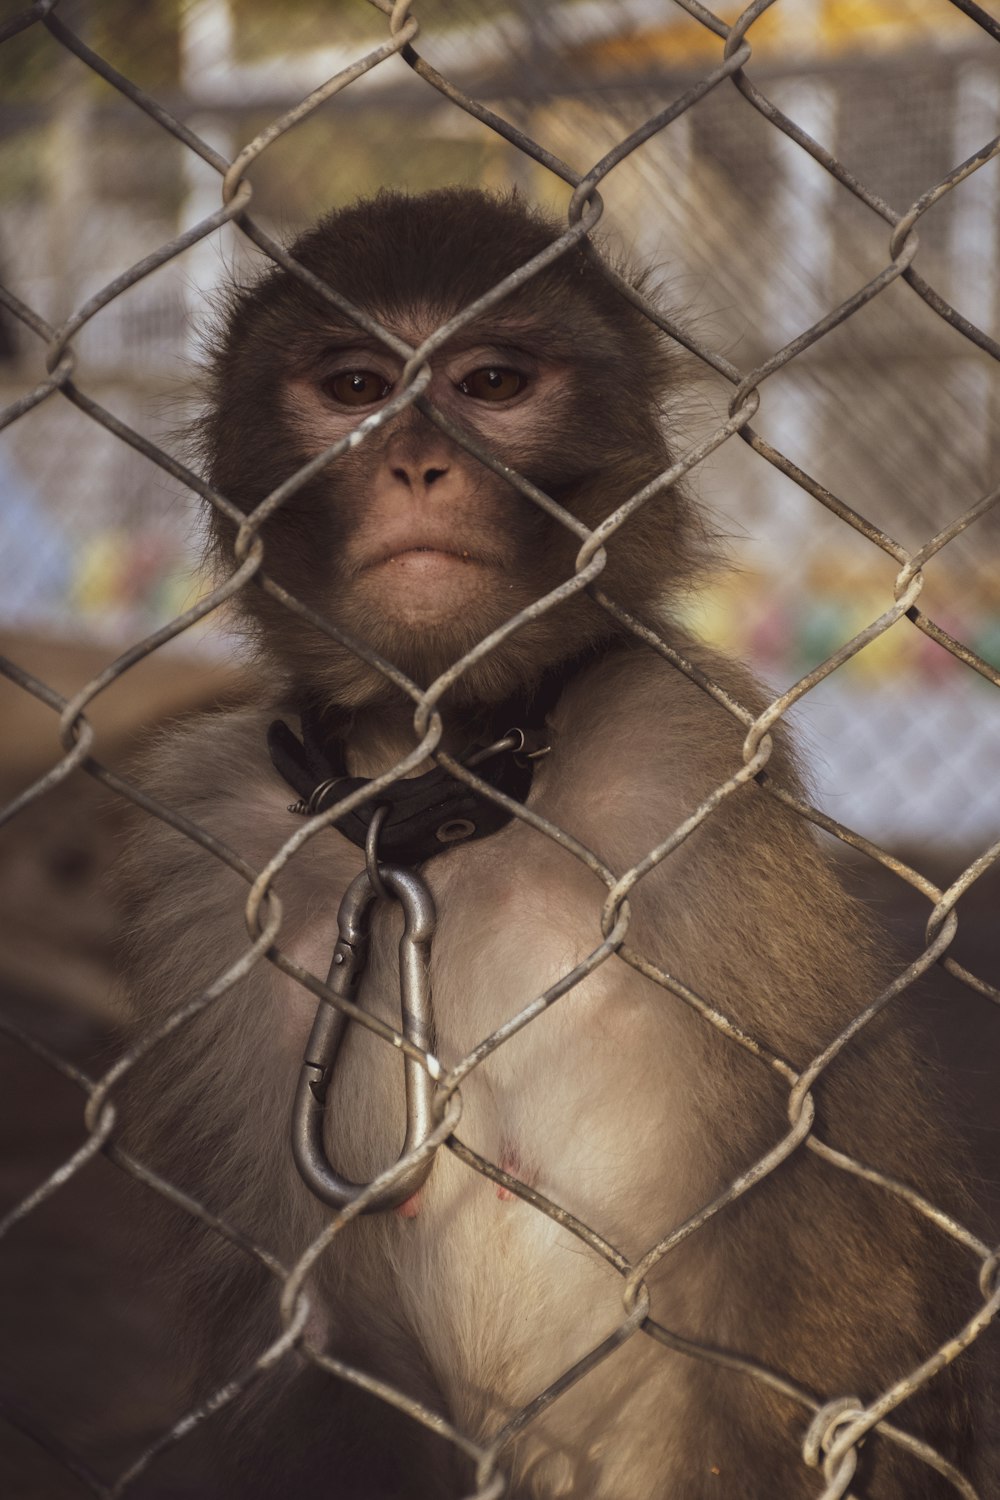 A monkey with a chain around its neck photo – Free Animal Image on Unsplash